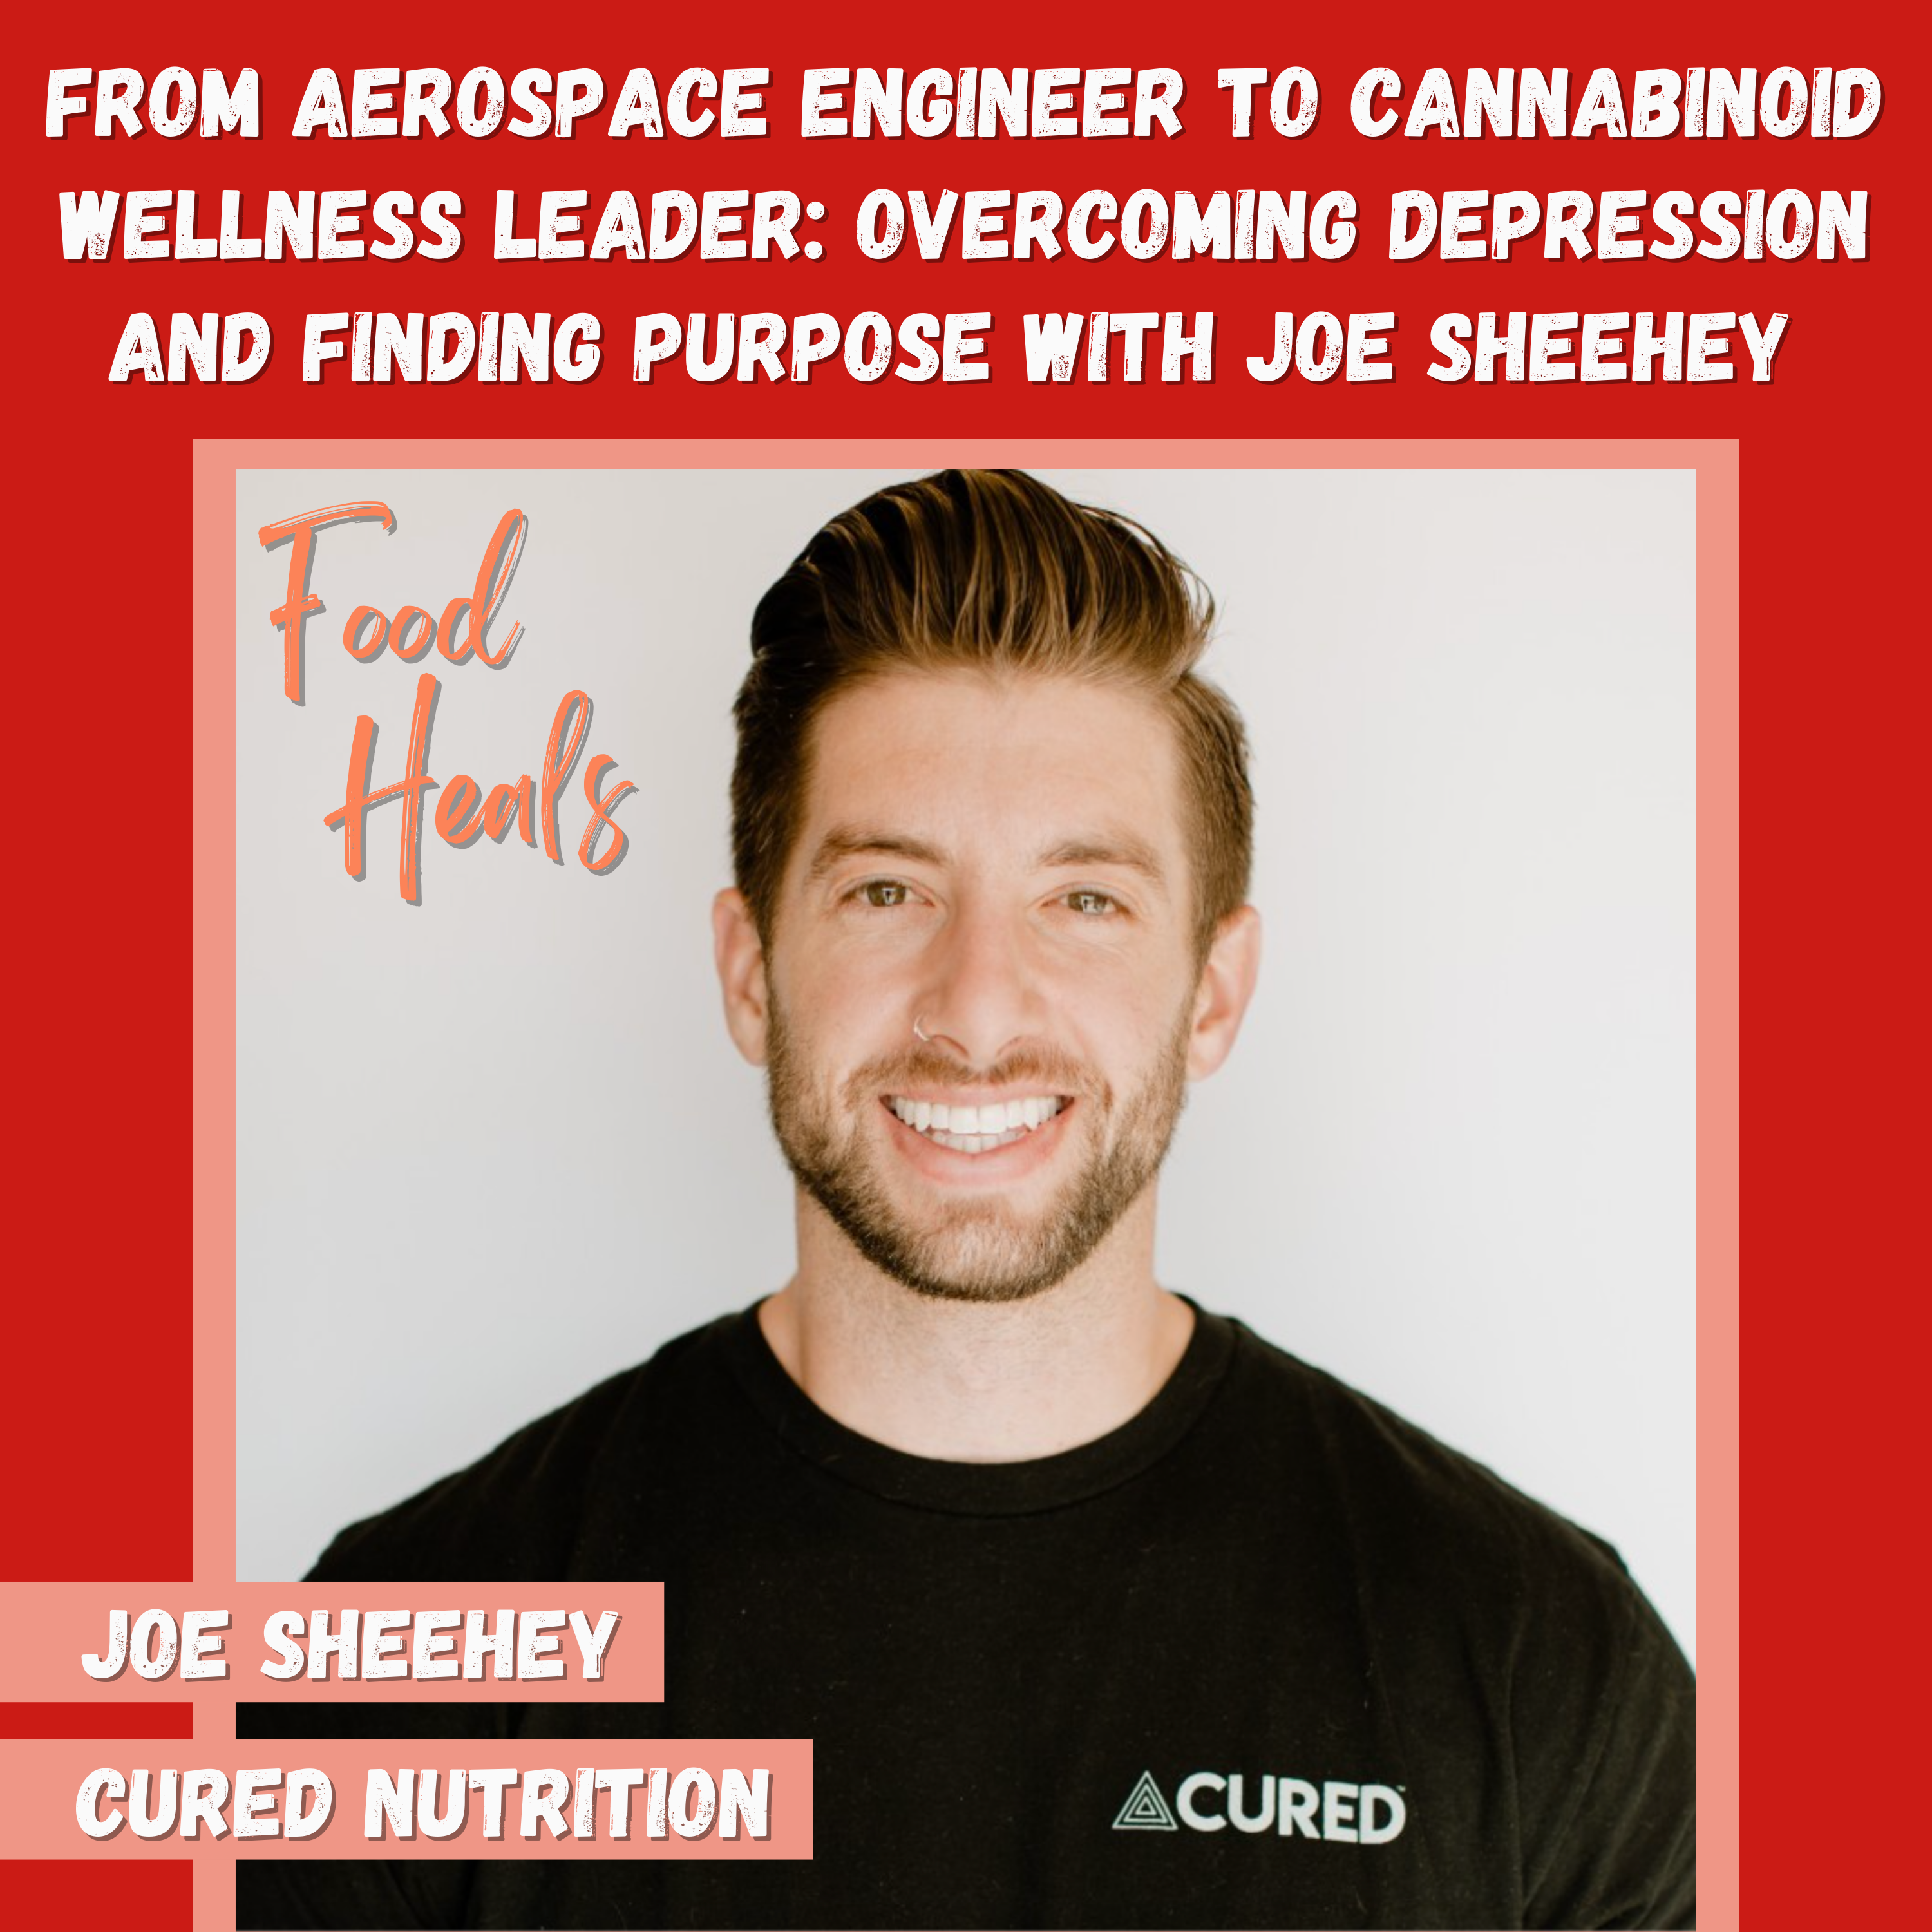 From Aerospace Engineer to Cannabinoid Wellness Leader: Overcoming Depression and Finding Purpose with CURED Nutrition Founder Joe Sheehey